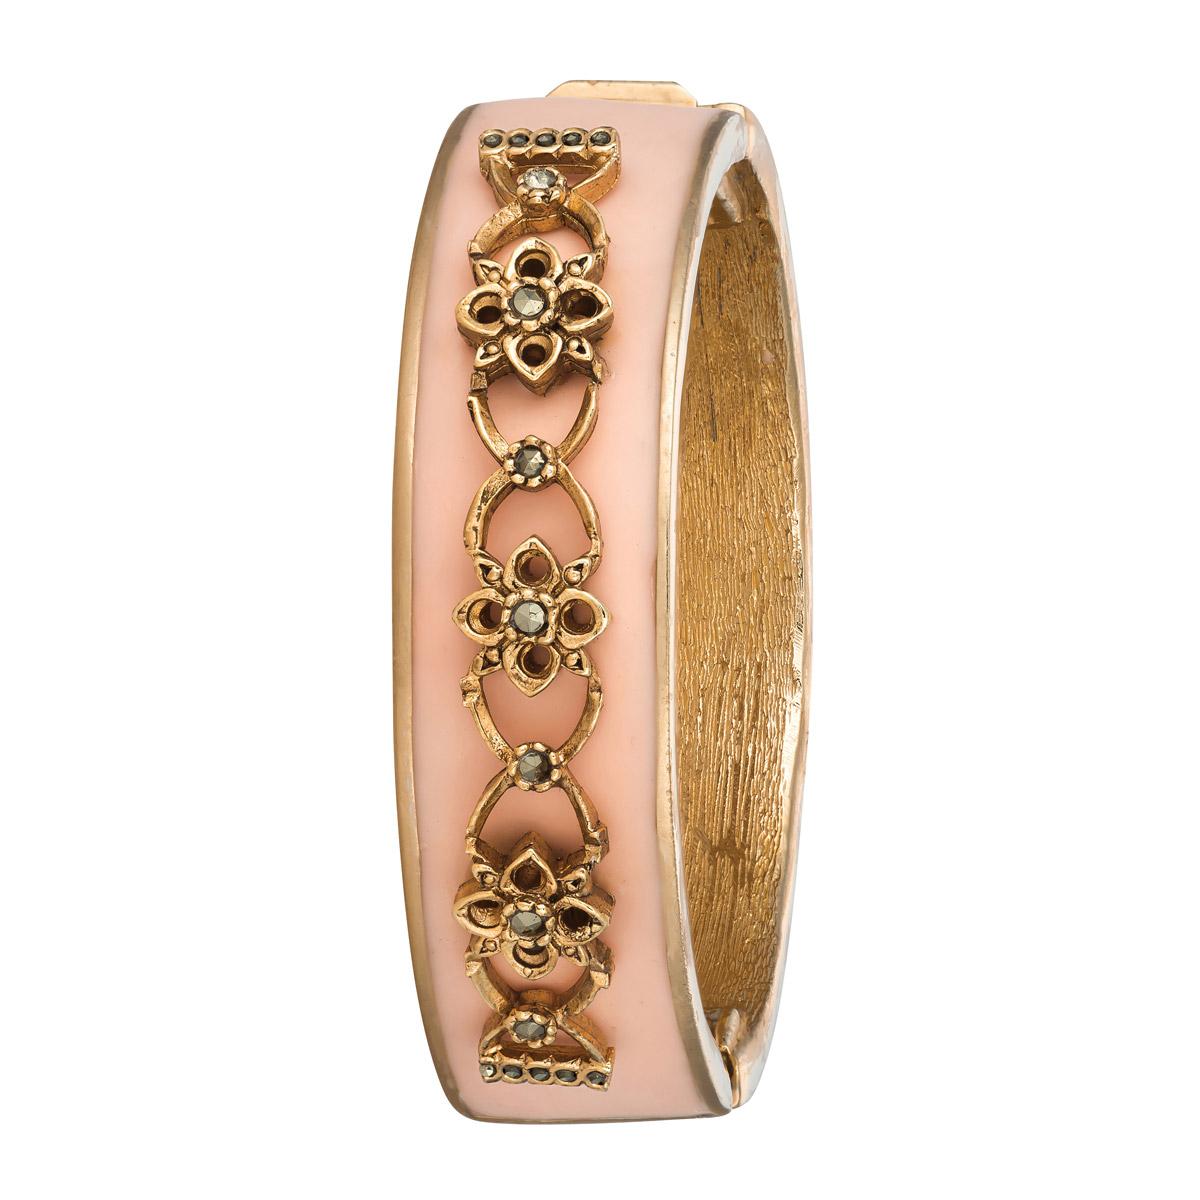 We simply adore the gorgeous pink color on this Narrow Secret Garden Bracelet. Inspire by vintage CINER compacts, this cuff adds the perfect amount of feminine charm to your jewelry repertoire. 

Materials:
Pewter
18K Gold Plating 
Box and Tongue